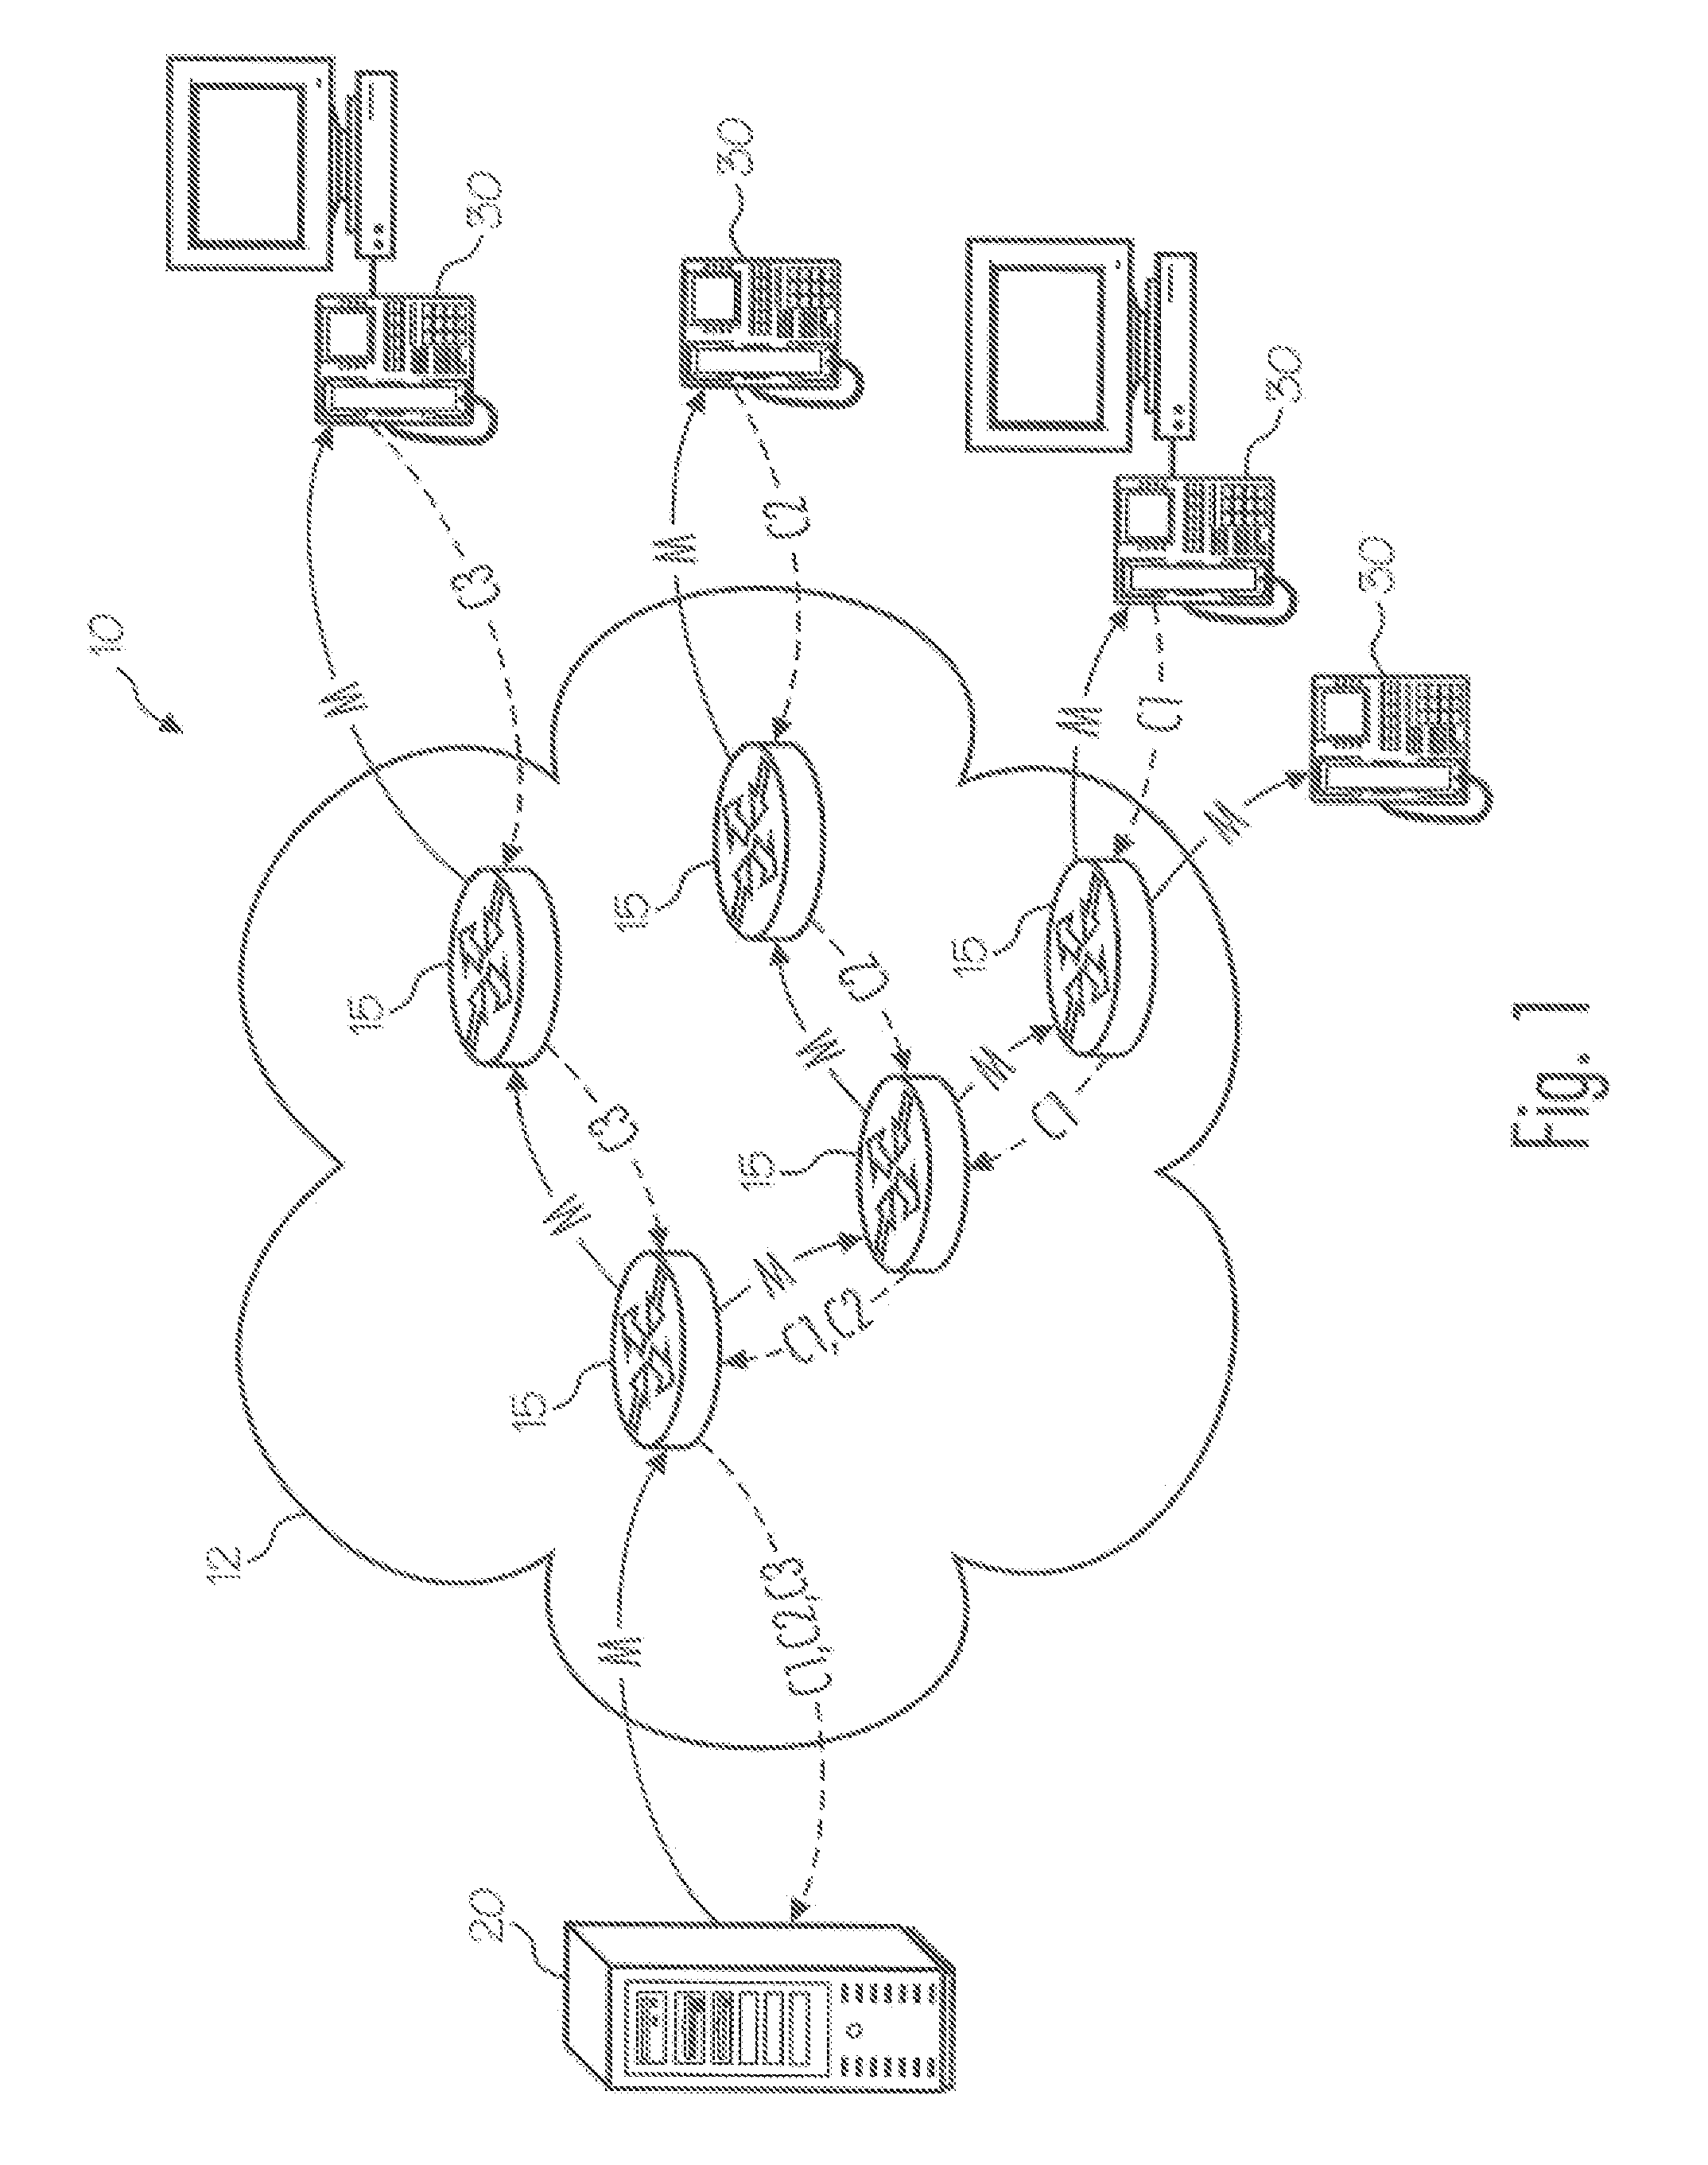 System and method for audio multicast